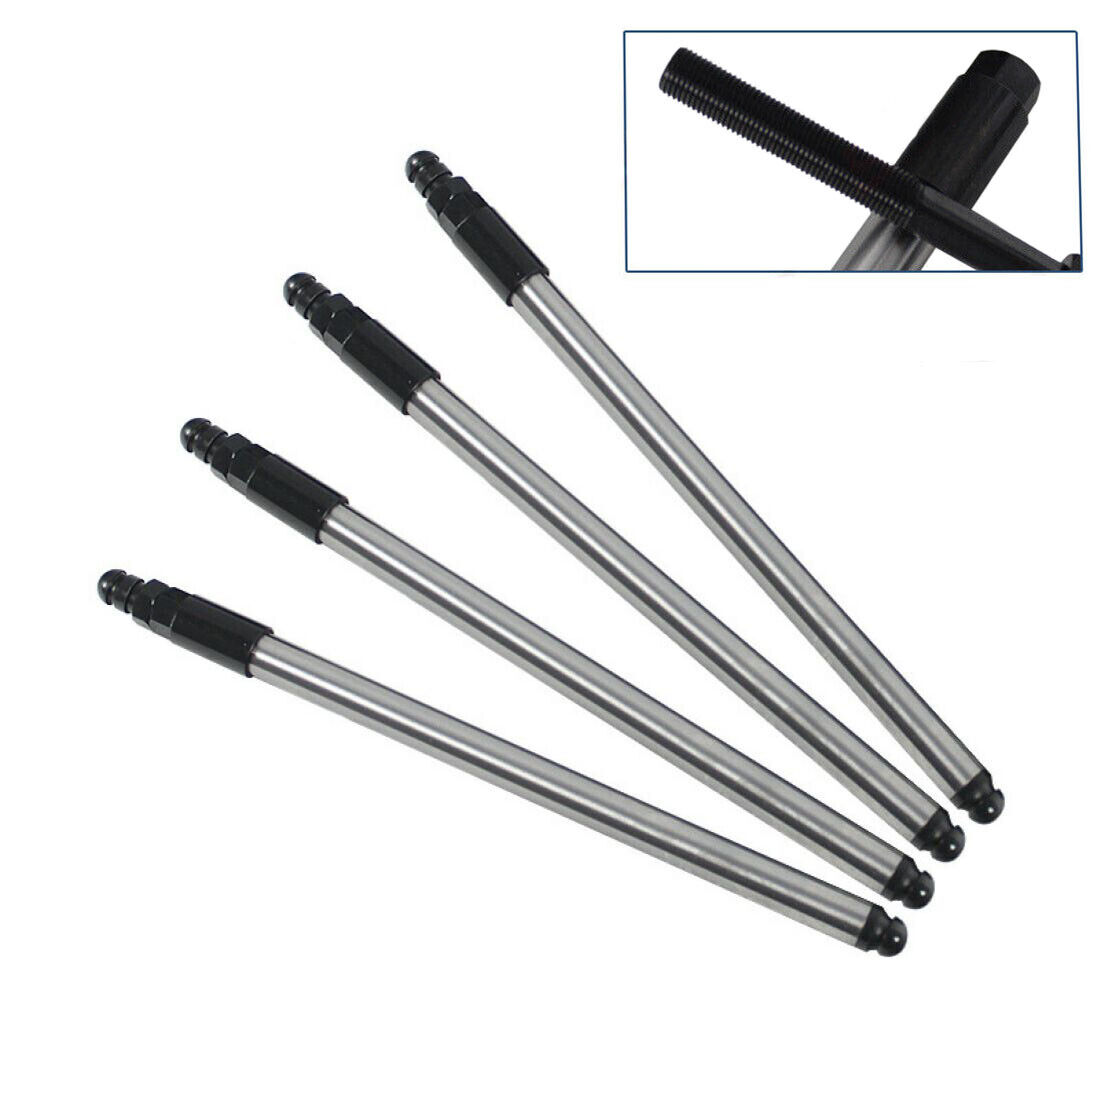 NEW Quickee EZ Install Adjustable Pushrods for 1999-2020 Harley Twin Cam